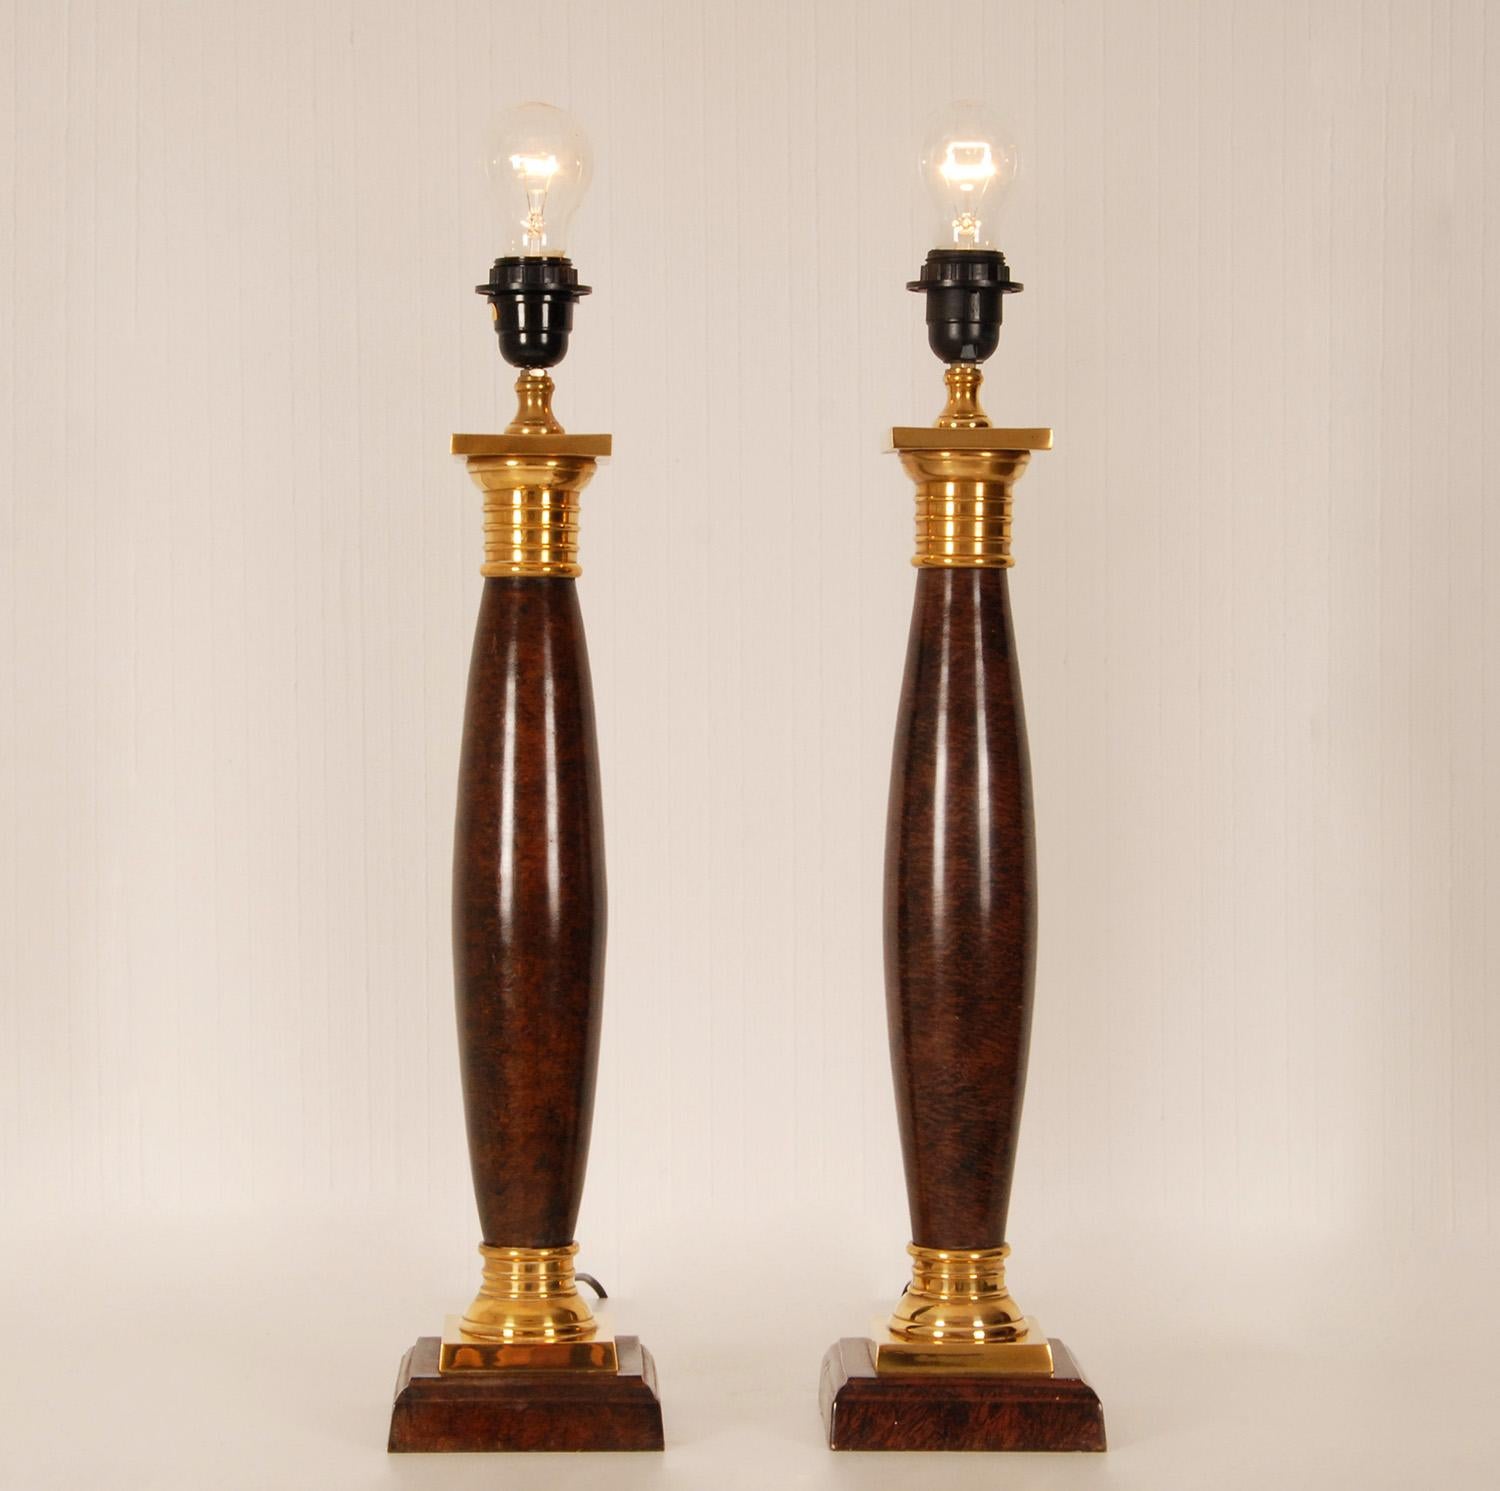 Patinated Vintage Napoleonic Column Table Lamps French Rosewood Gold Gilded Bronze, a Pair For Sale